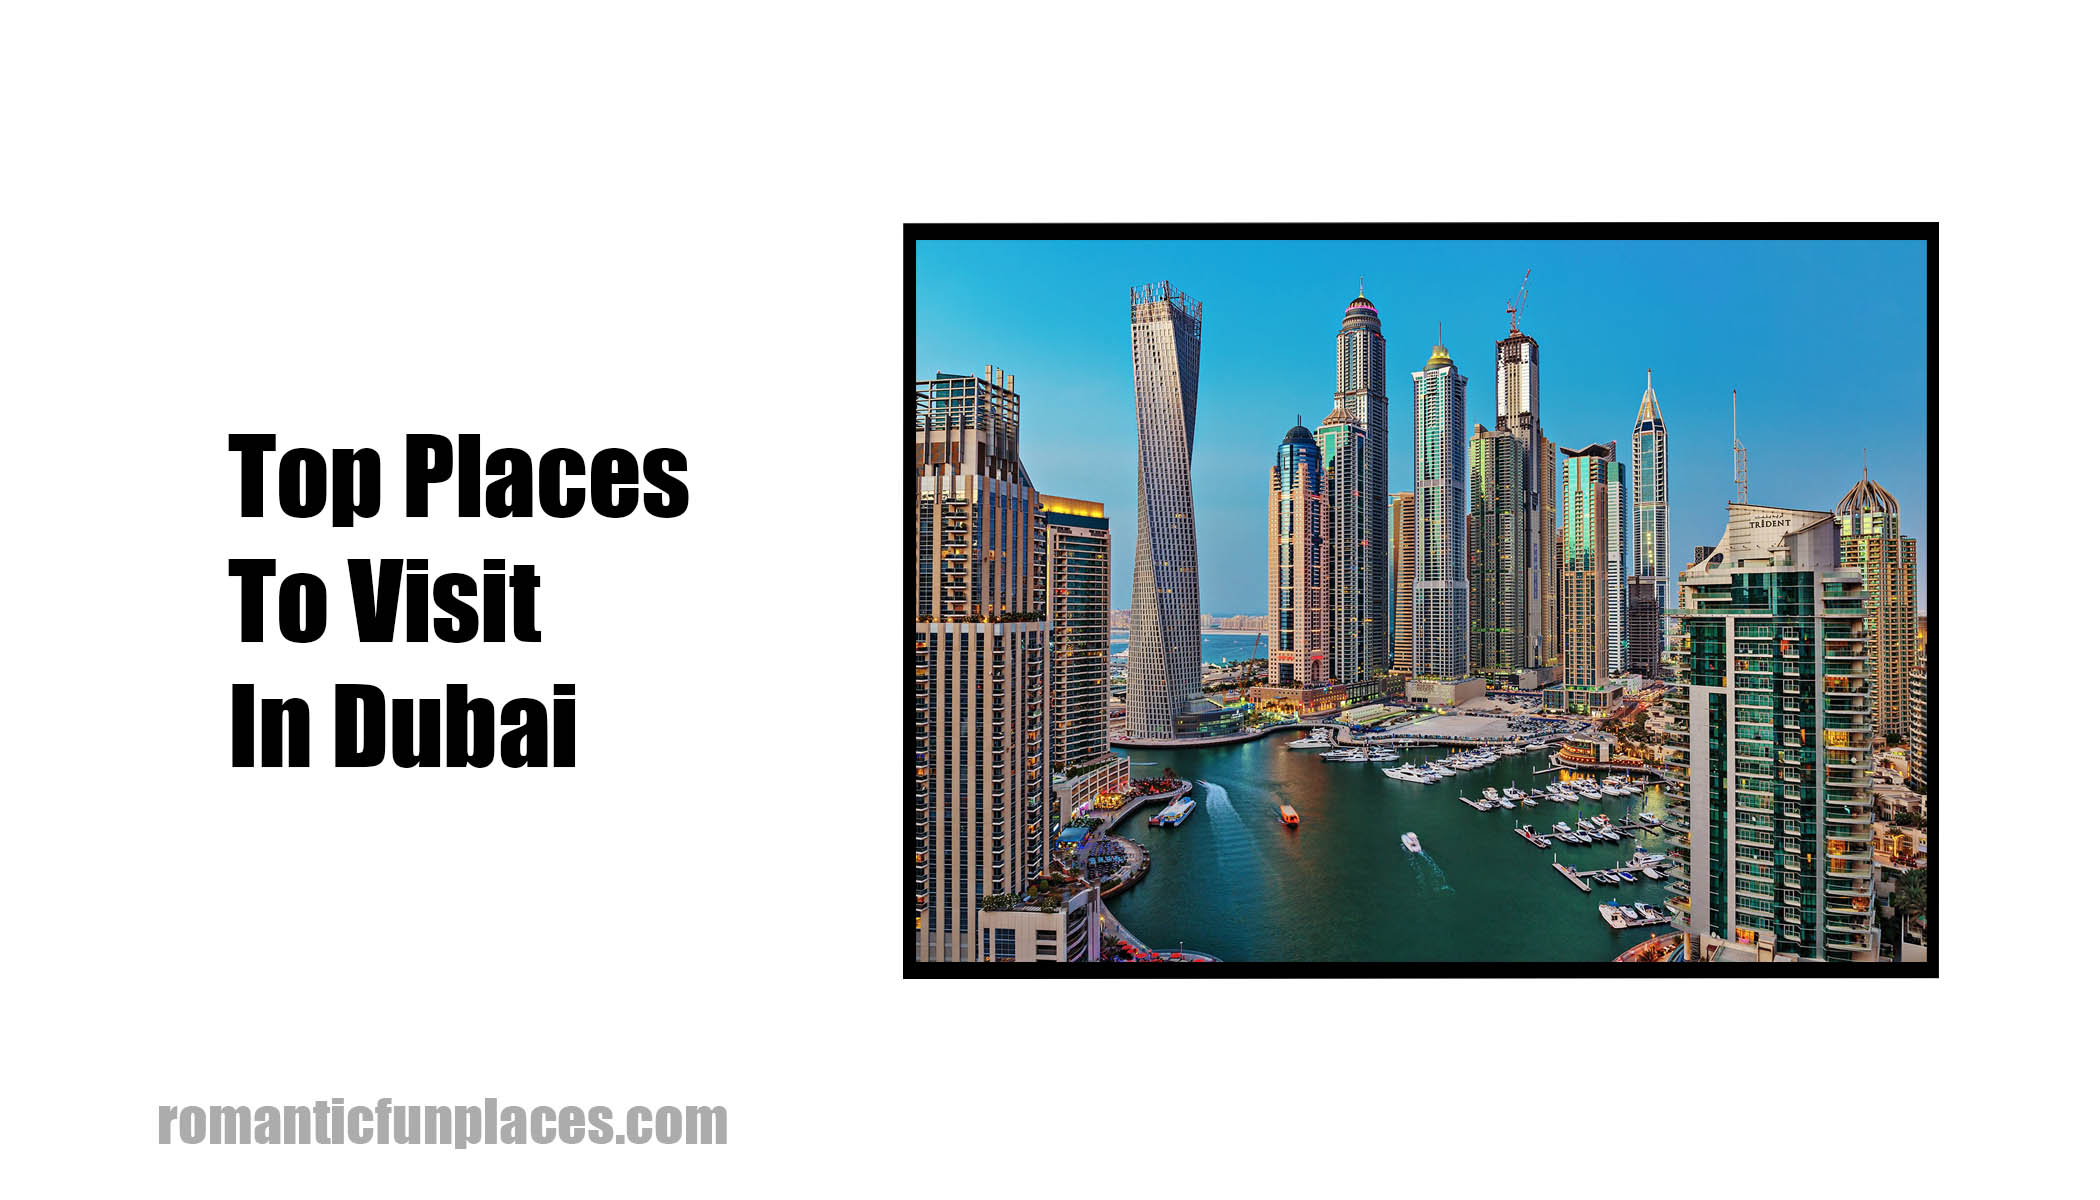 Top Places To Visit In Dubai